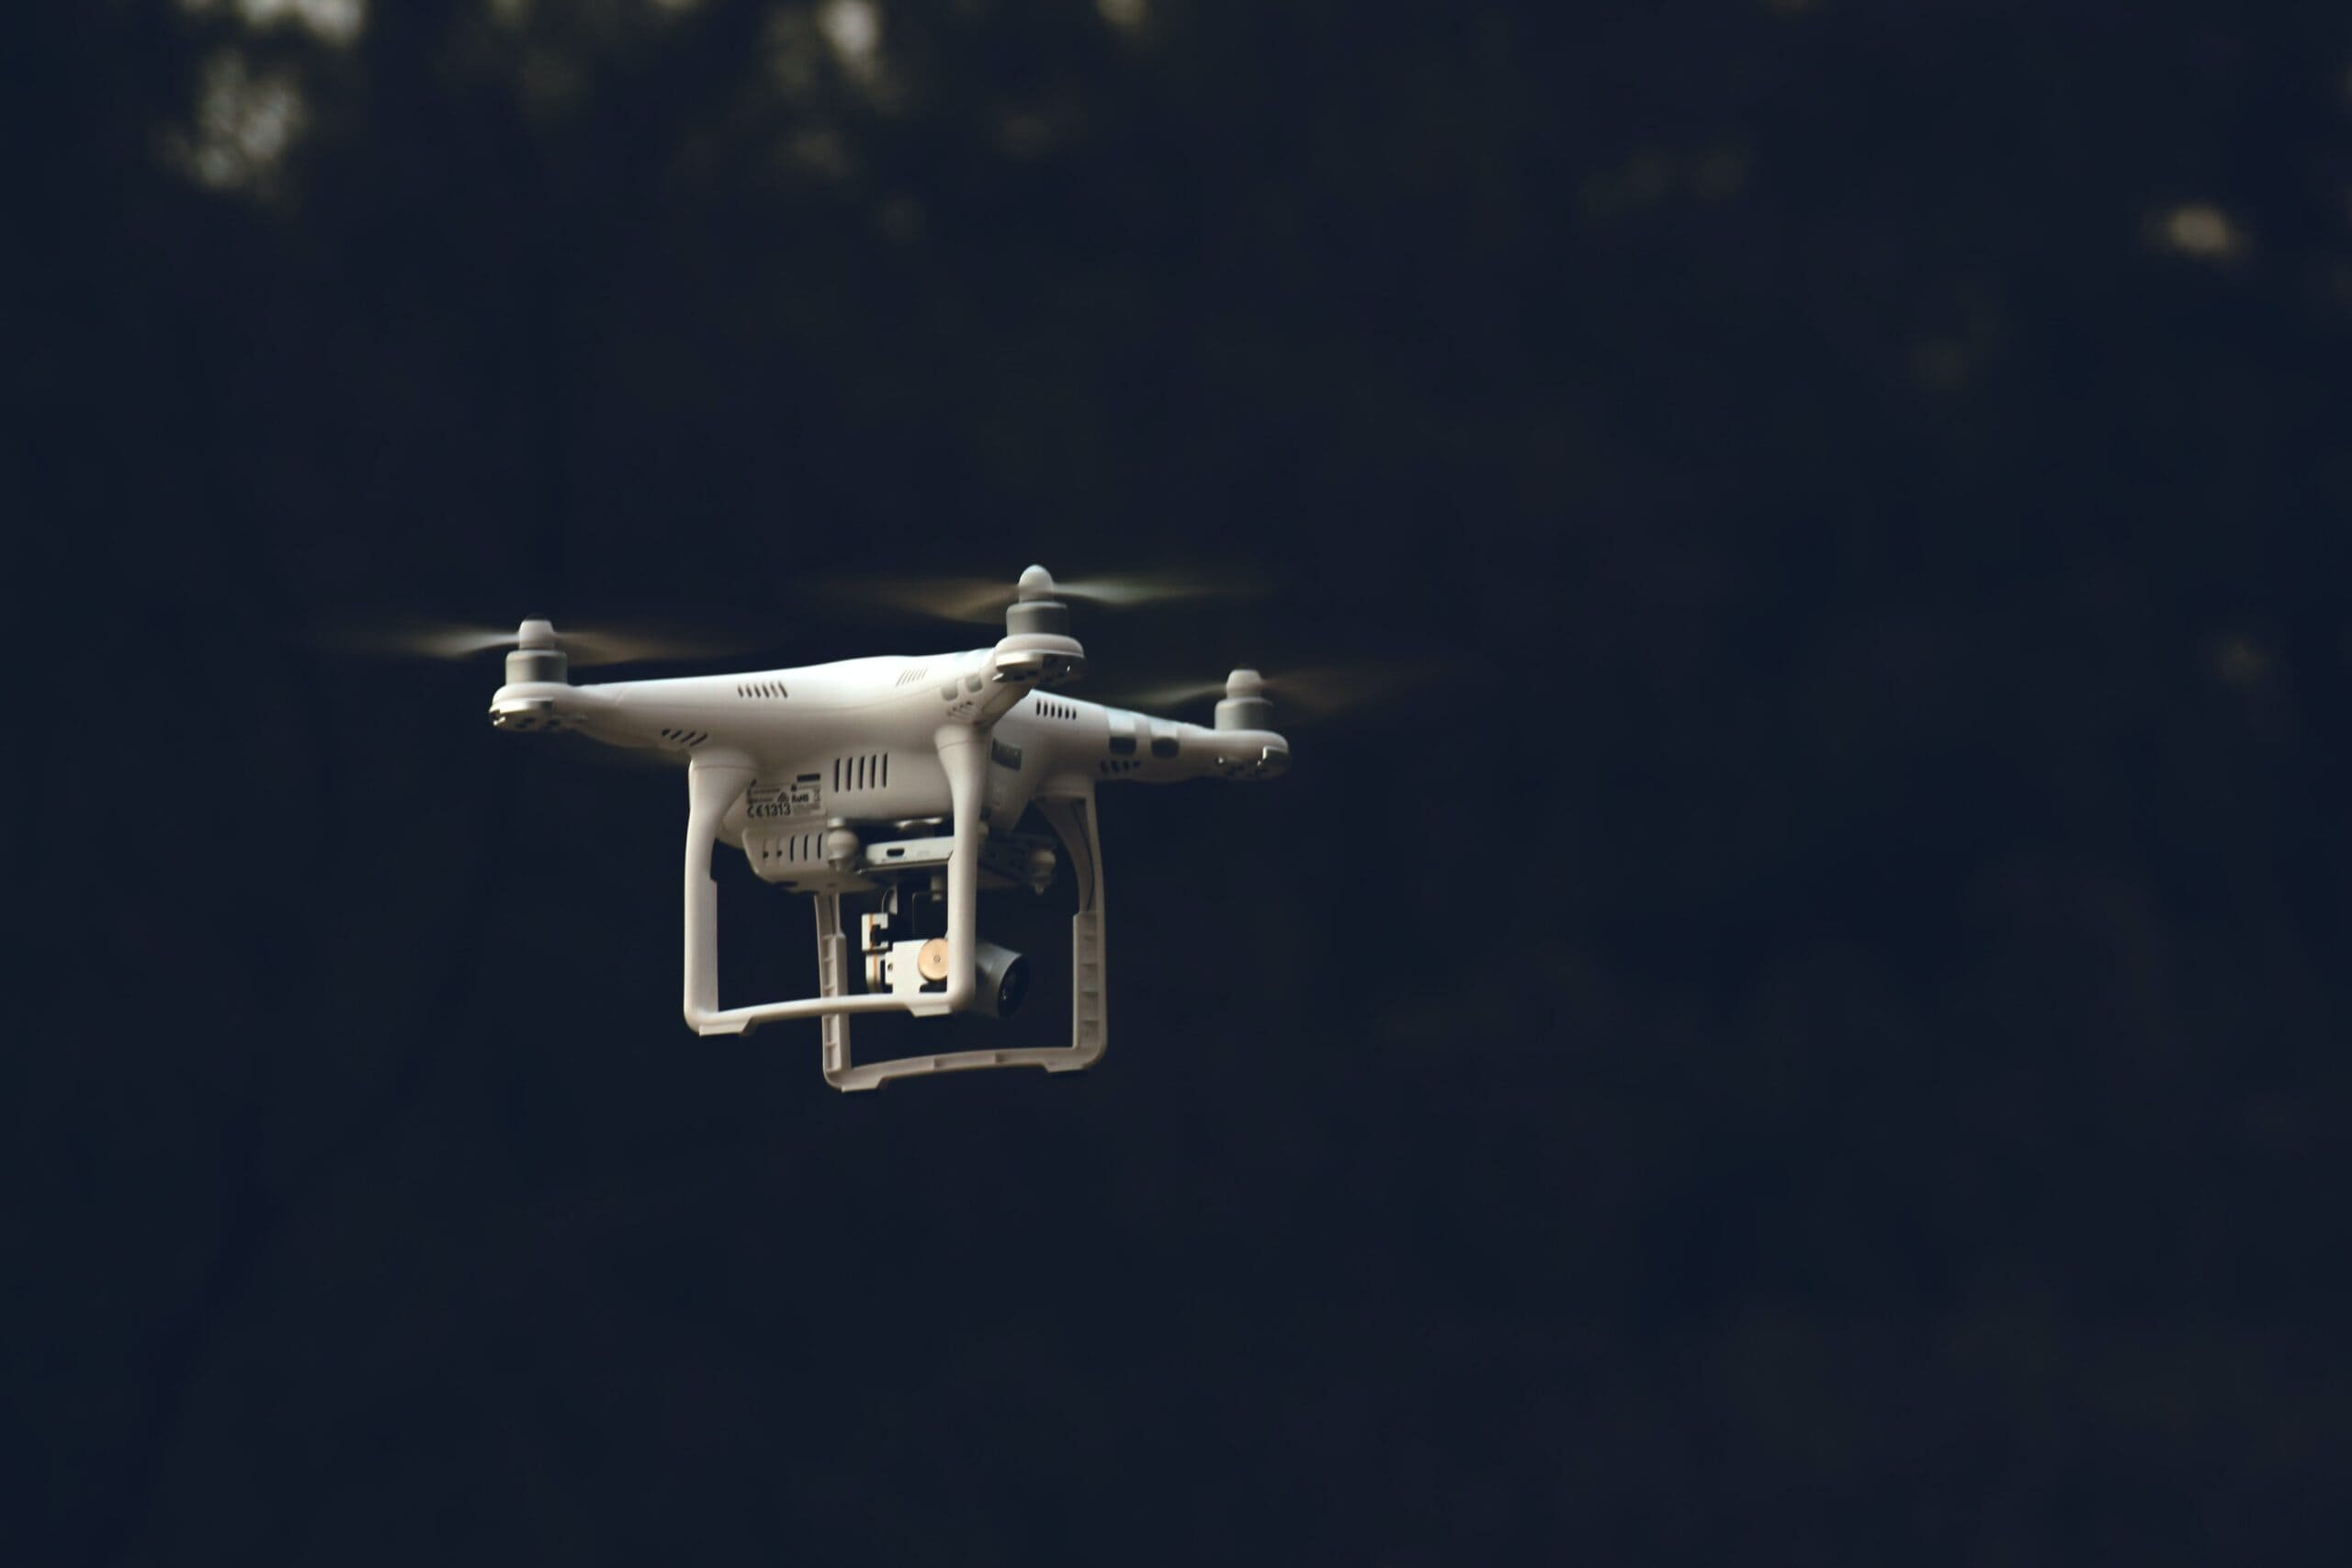 The trial was carried out under the aegis of ICMR's i-DRONE initiative. (Representational image/Unsplash)